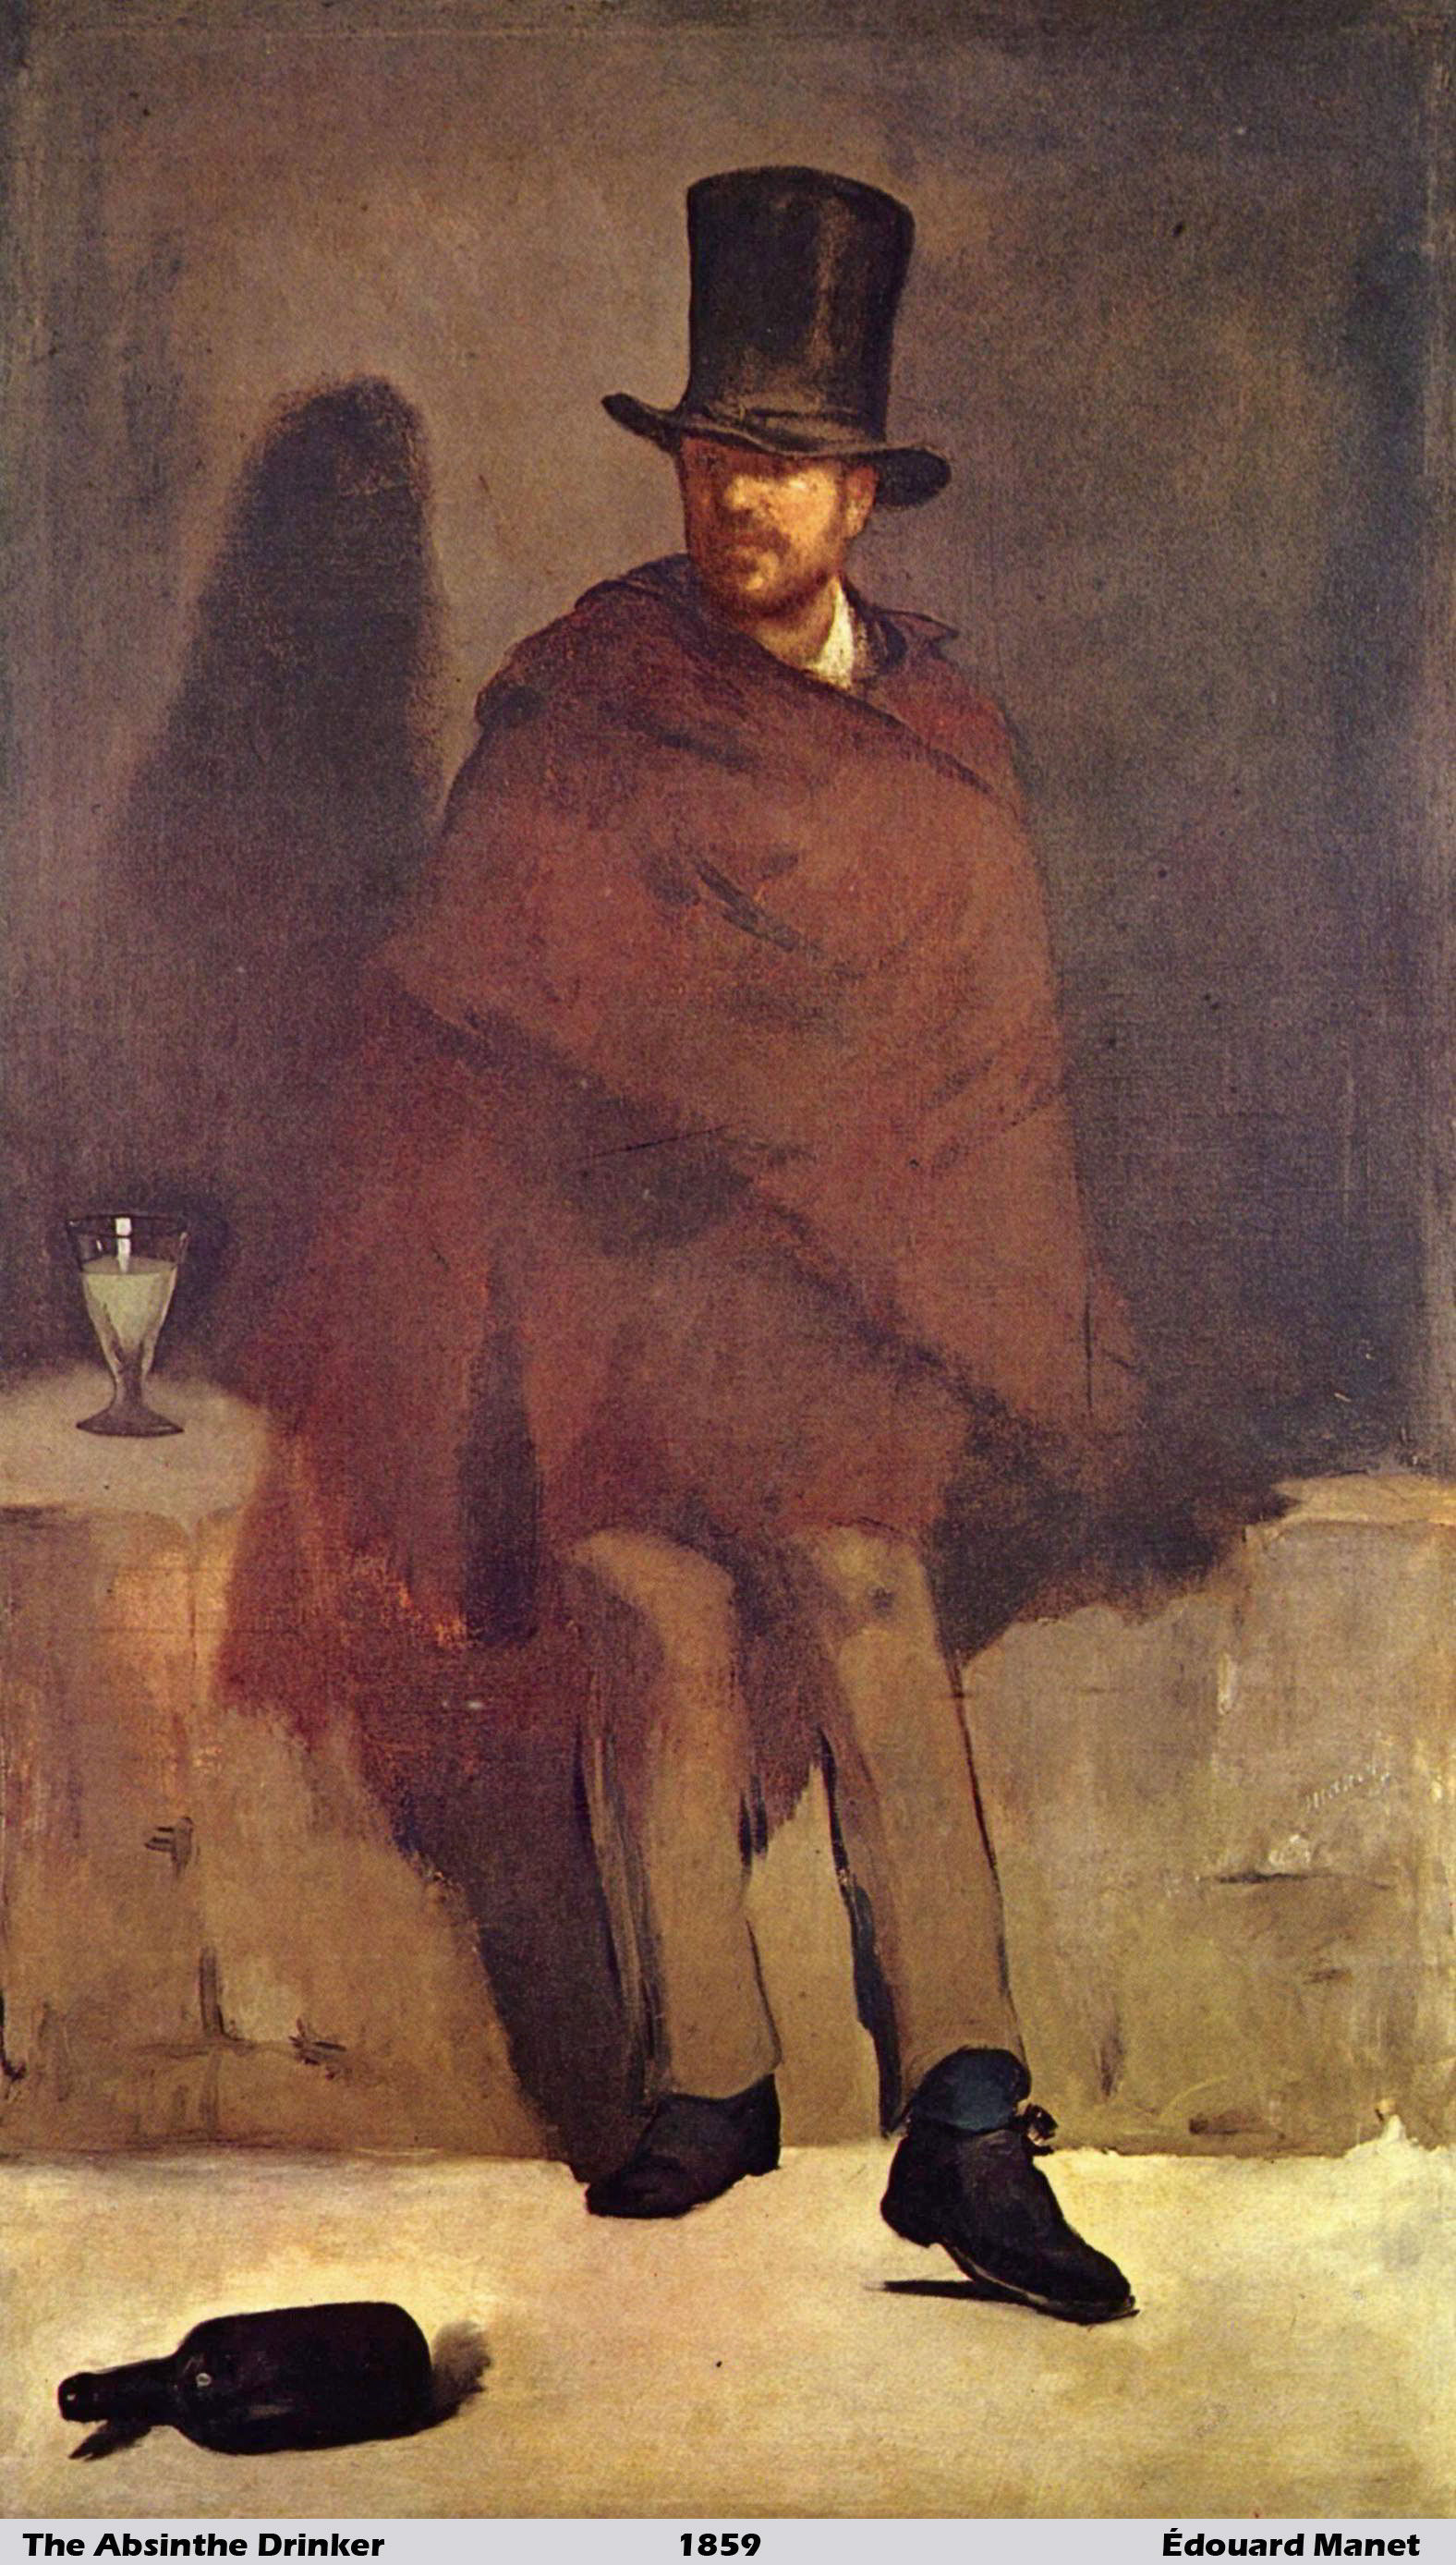 The Absinthe Drinker by Édouard Manet